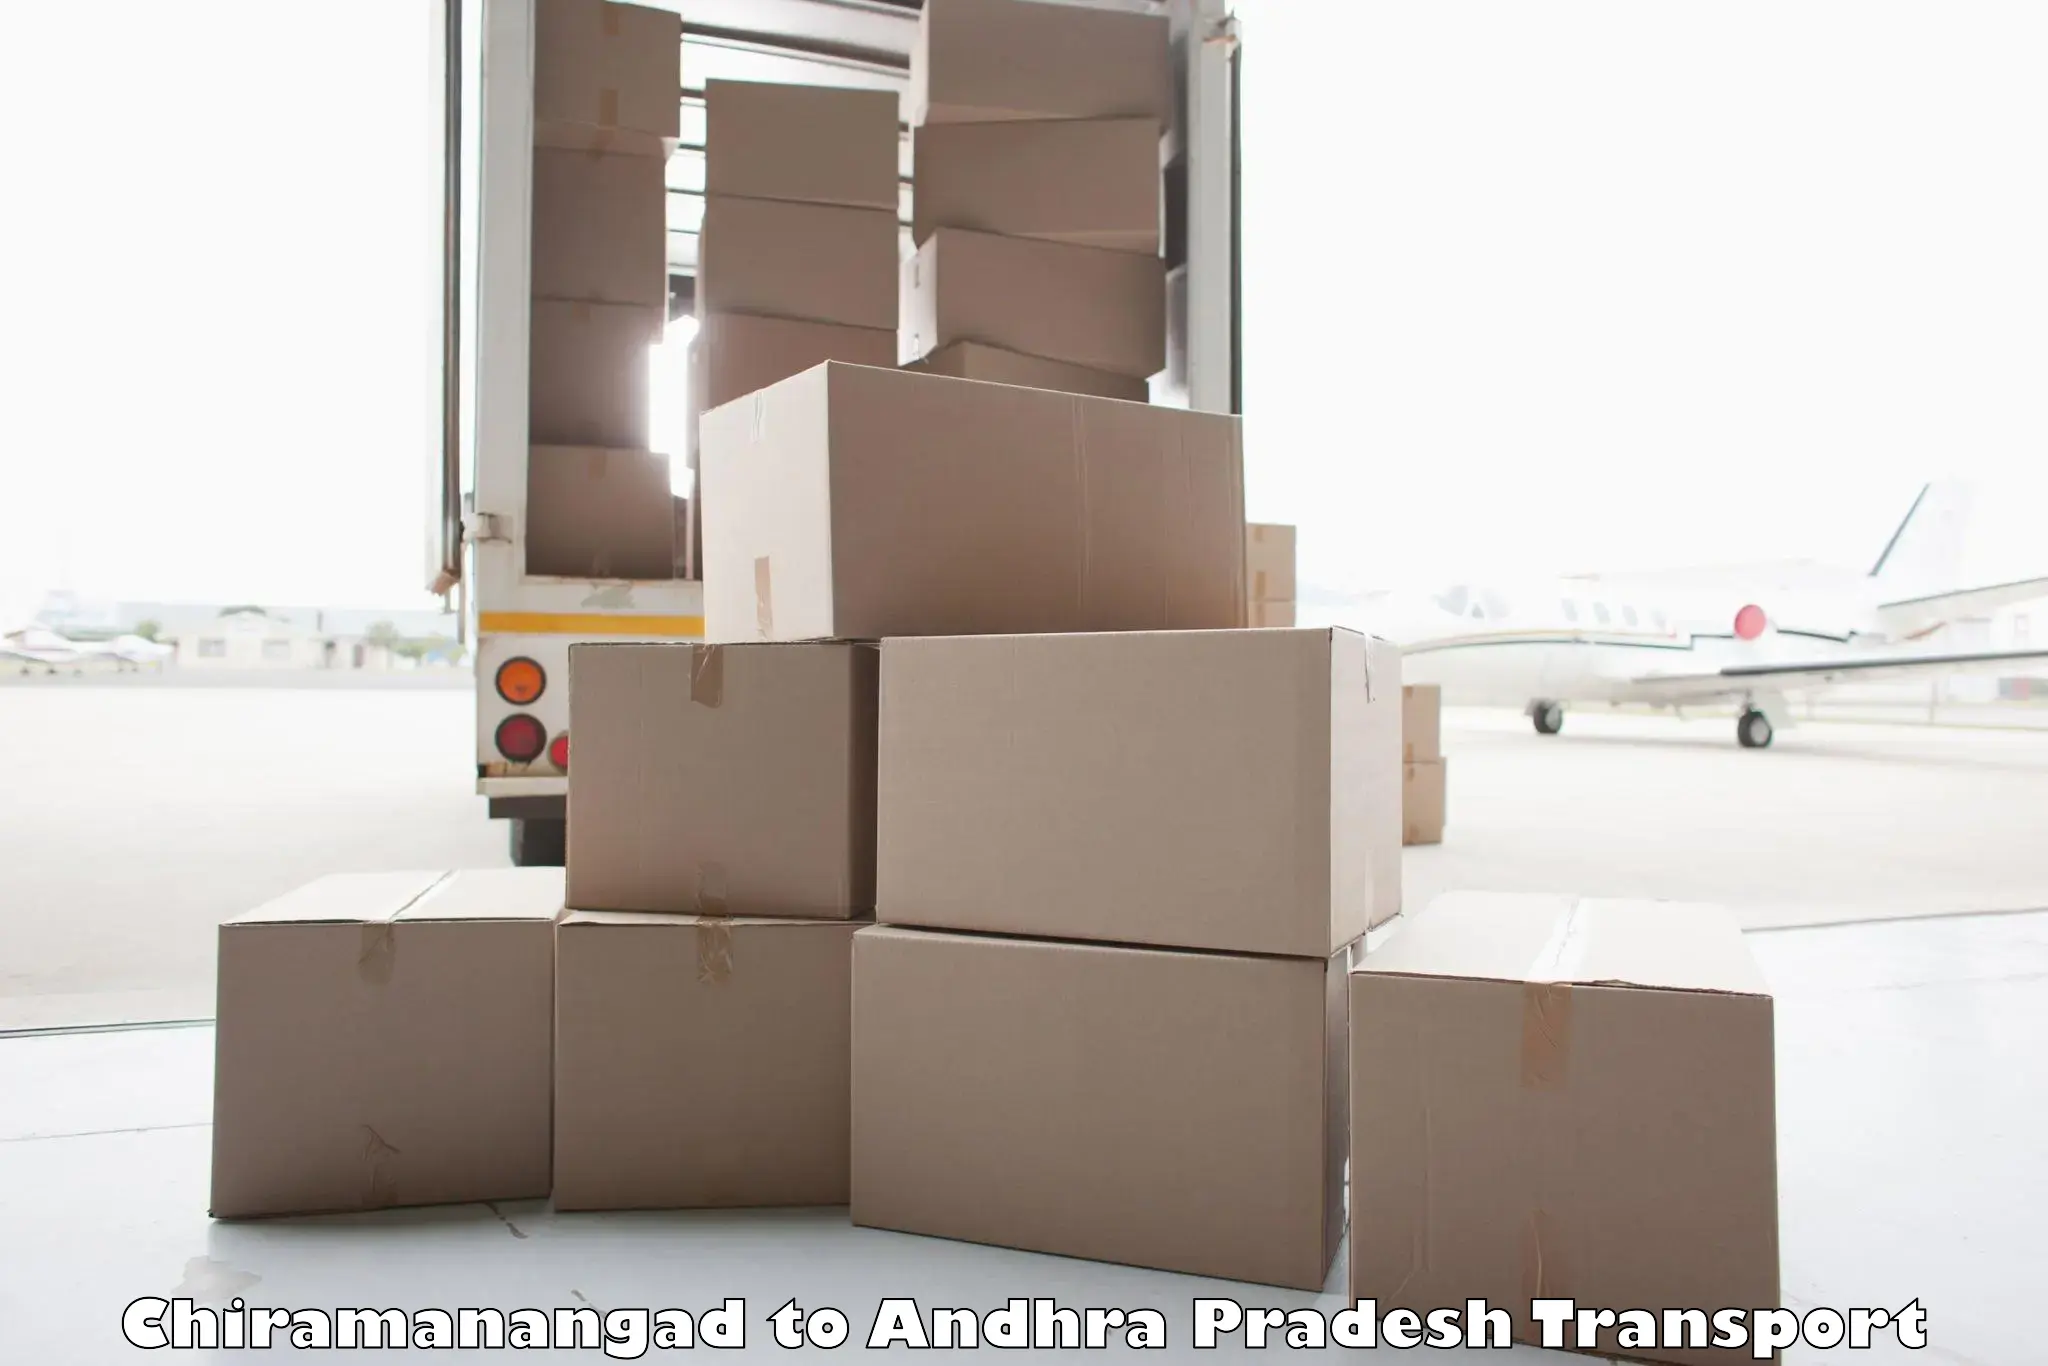 Vehicle courier services in Chiramanangad to Addateegala